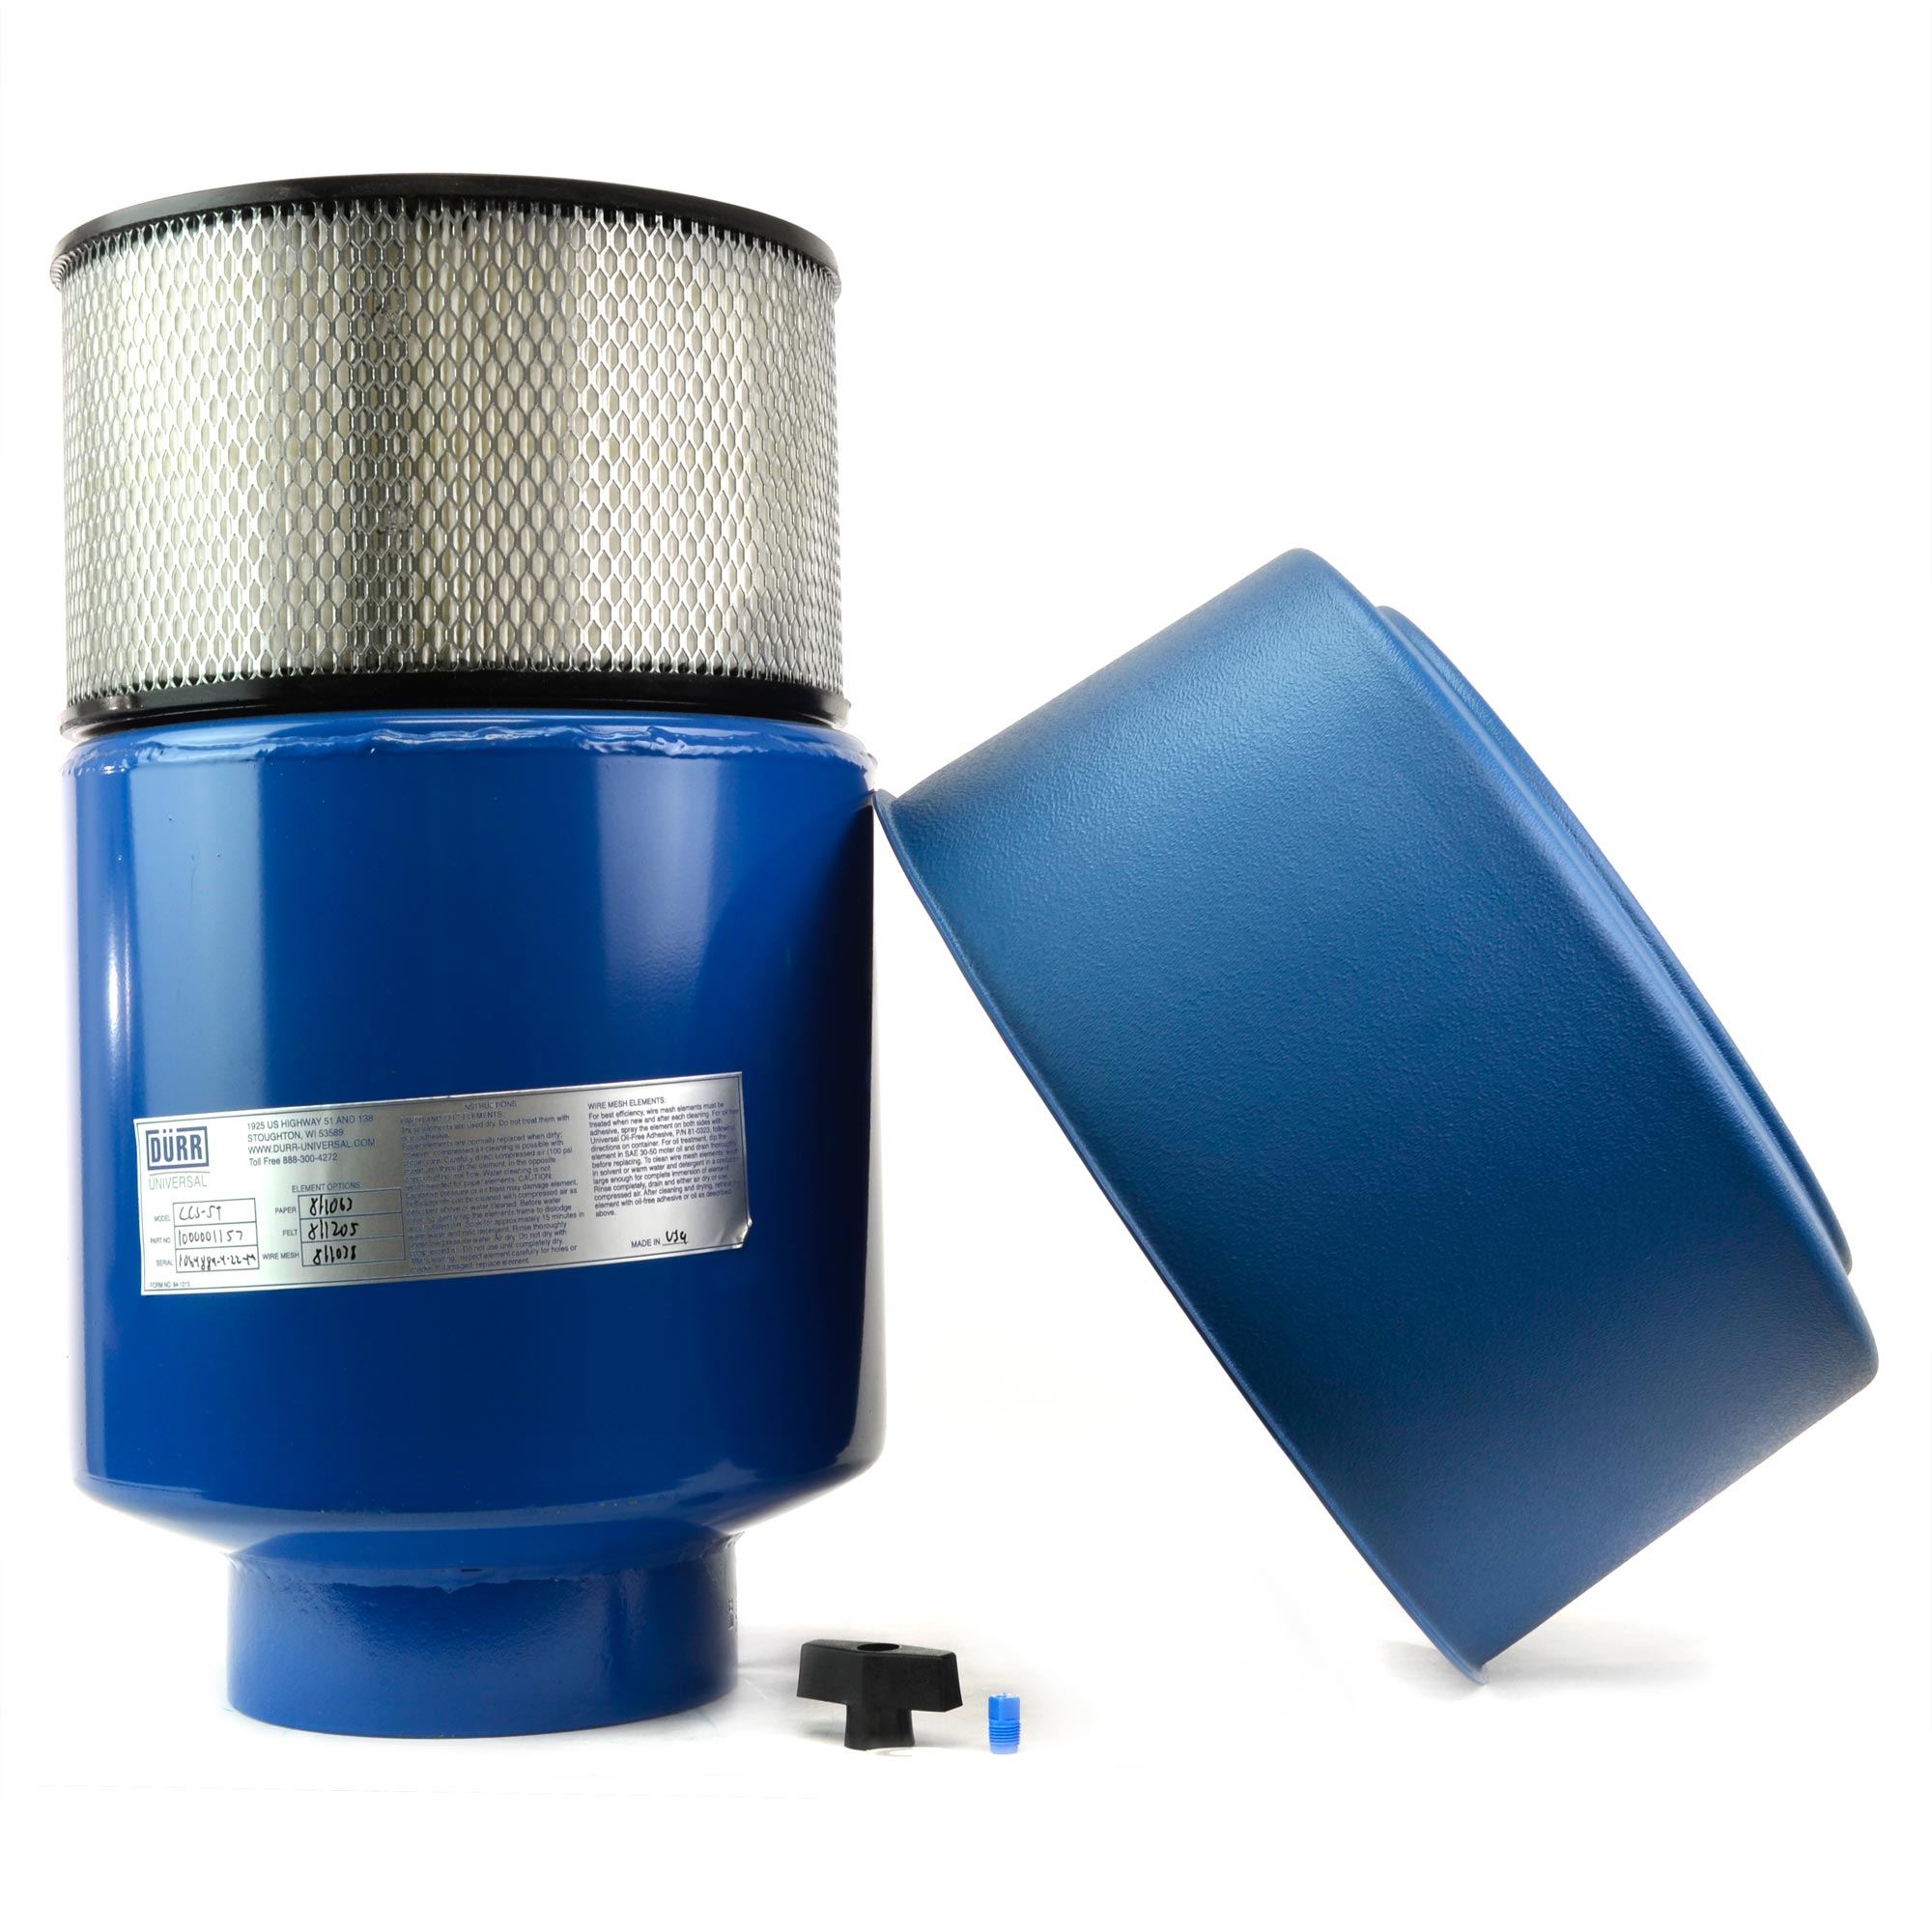 CCS-5 threaded filter (disassembled)